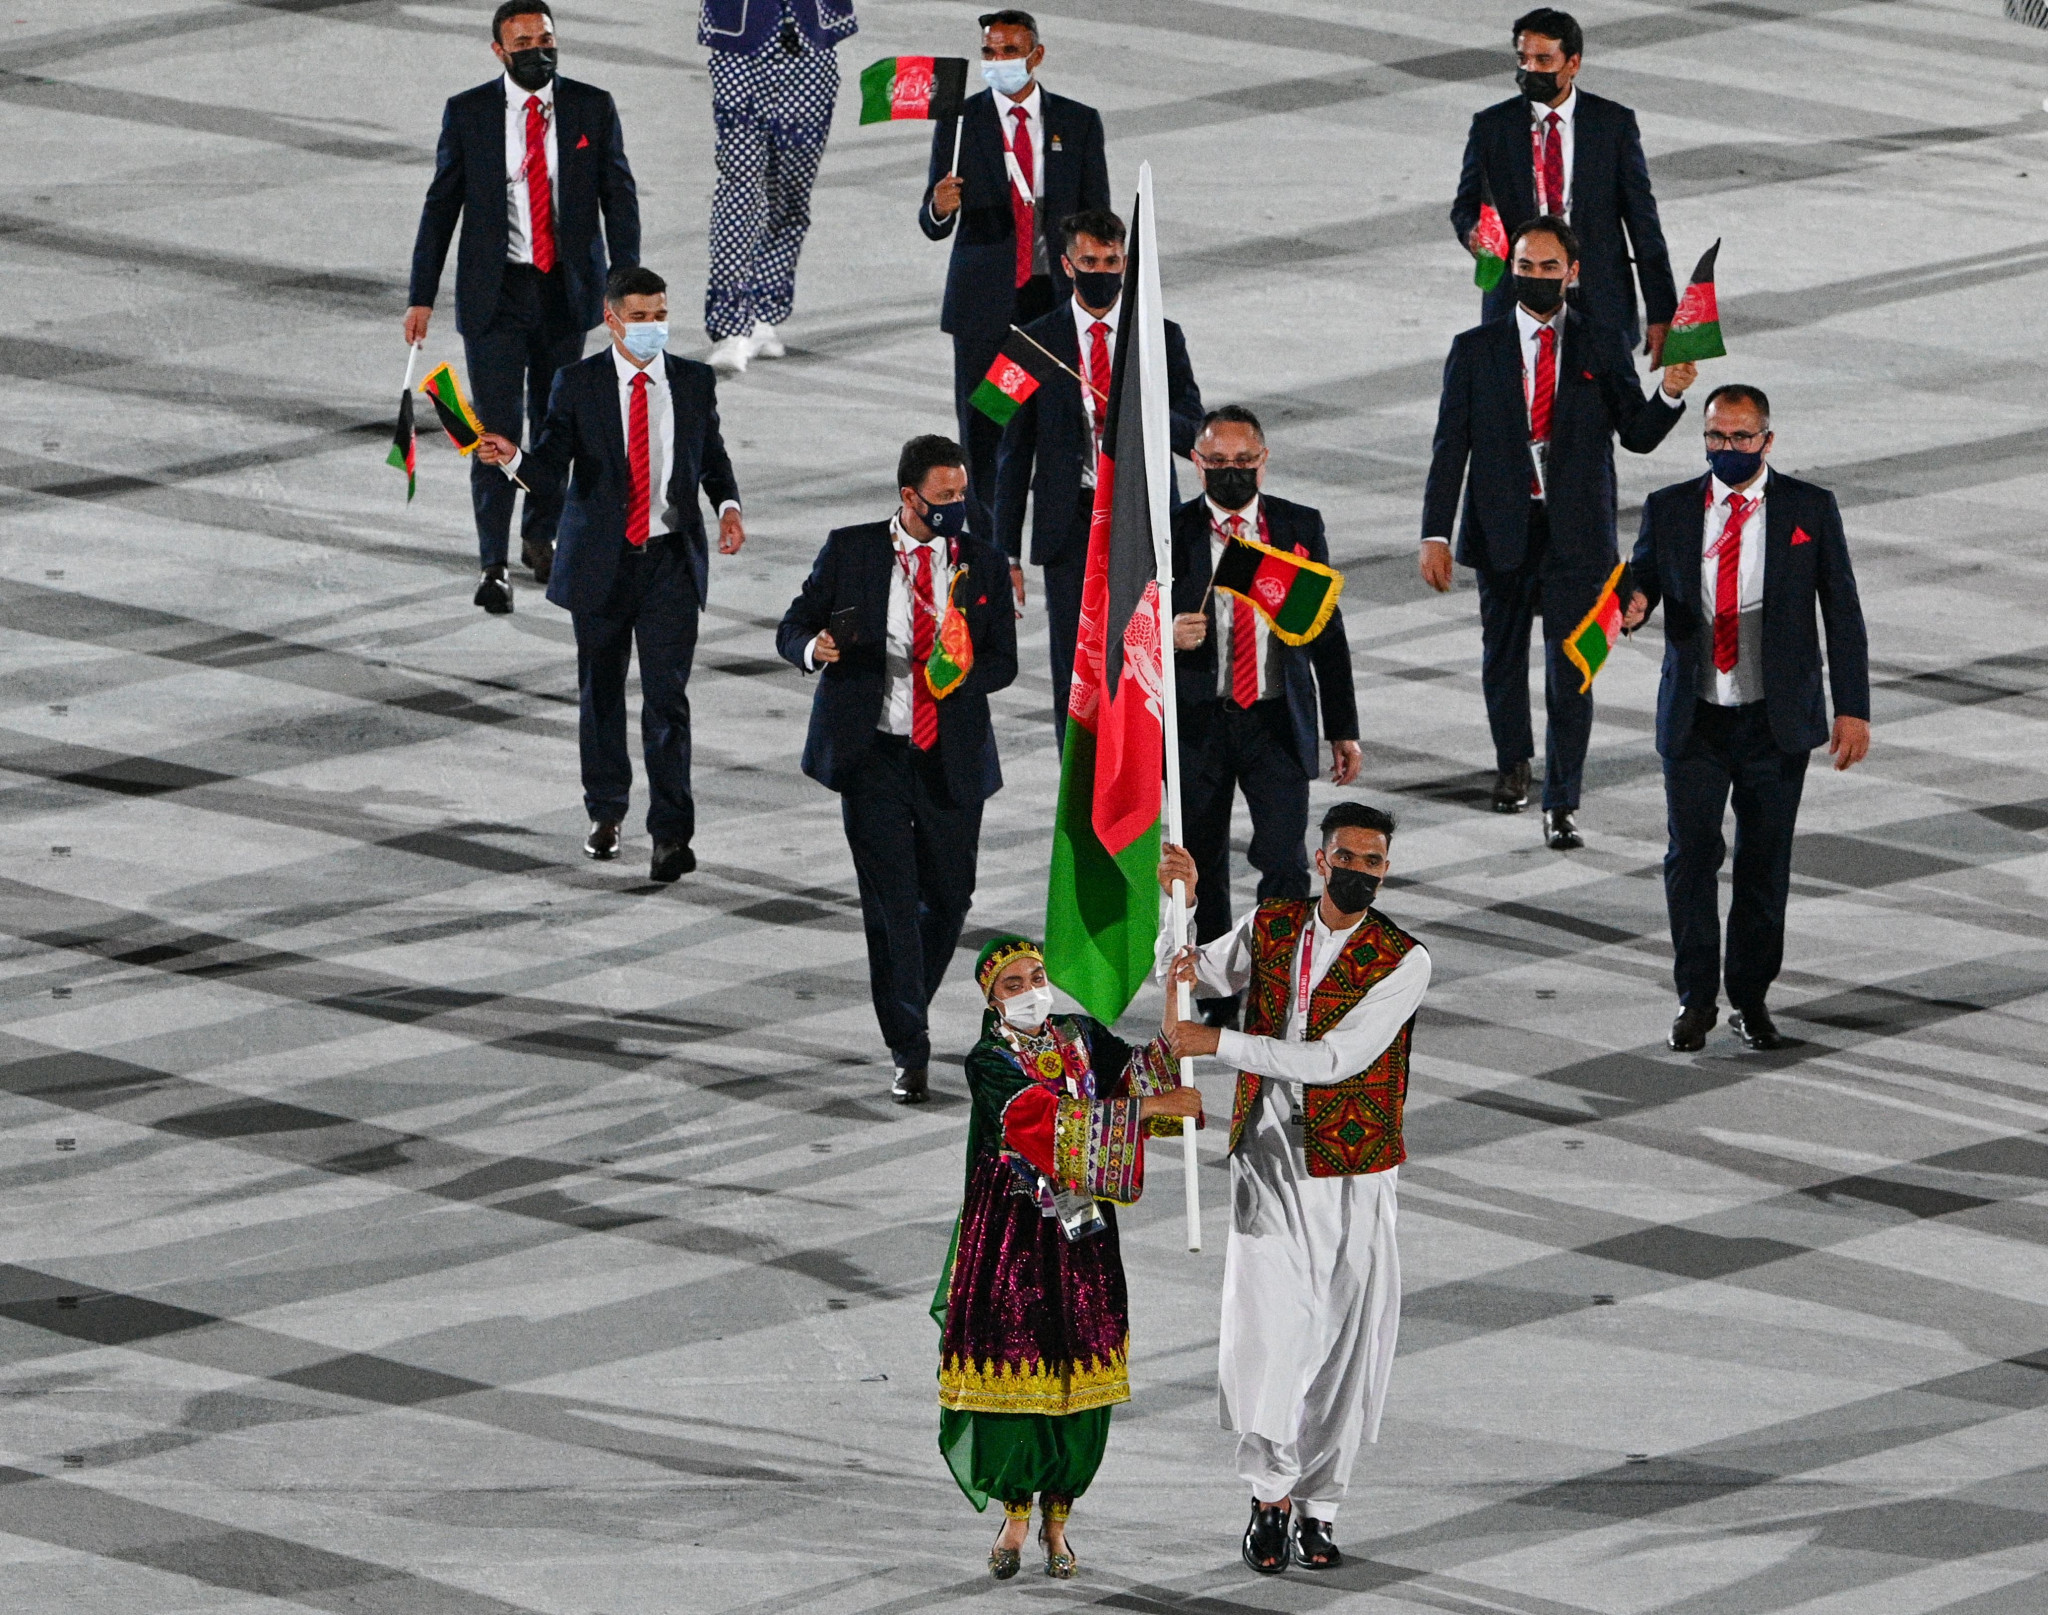 Afghanistan’s Paris 2024 place undecided as IOC calls for "significant progress" for women in sport